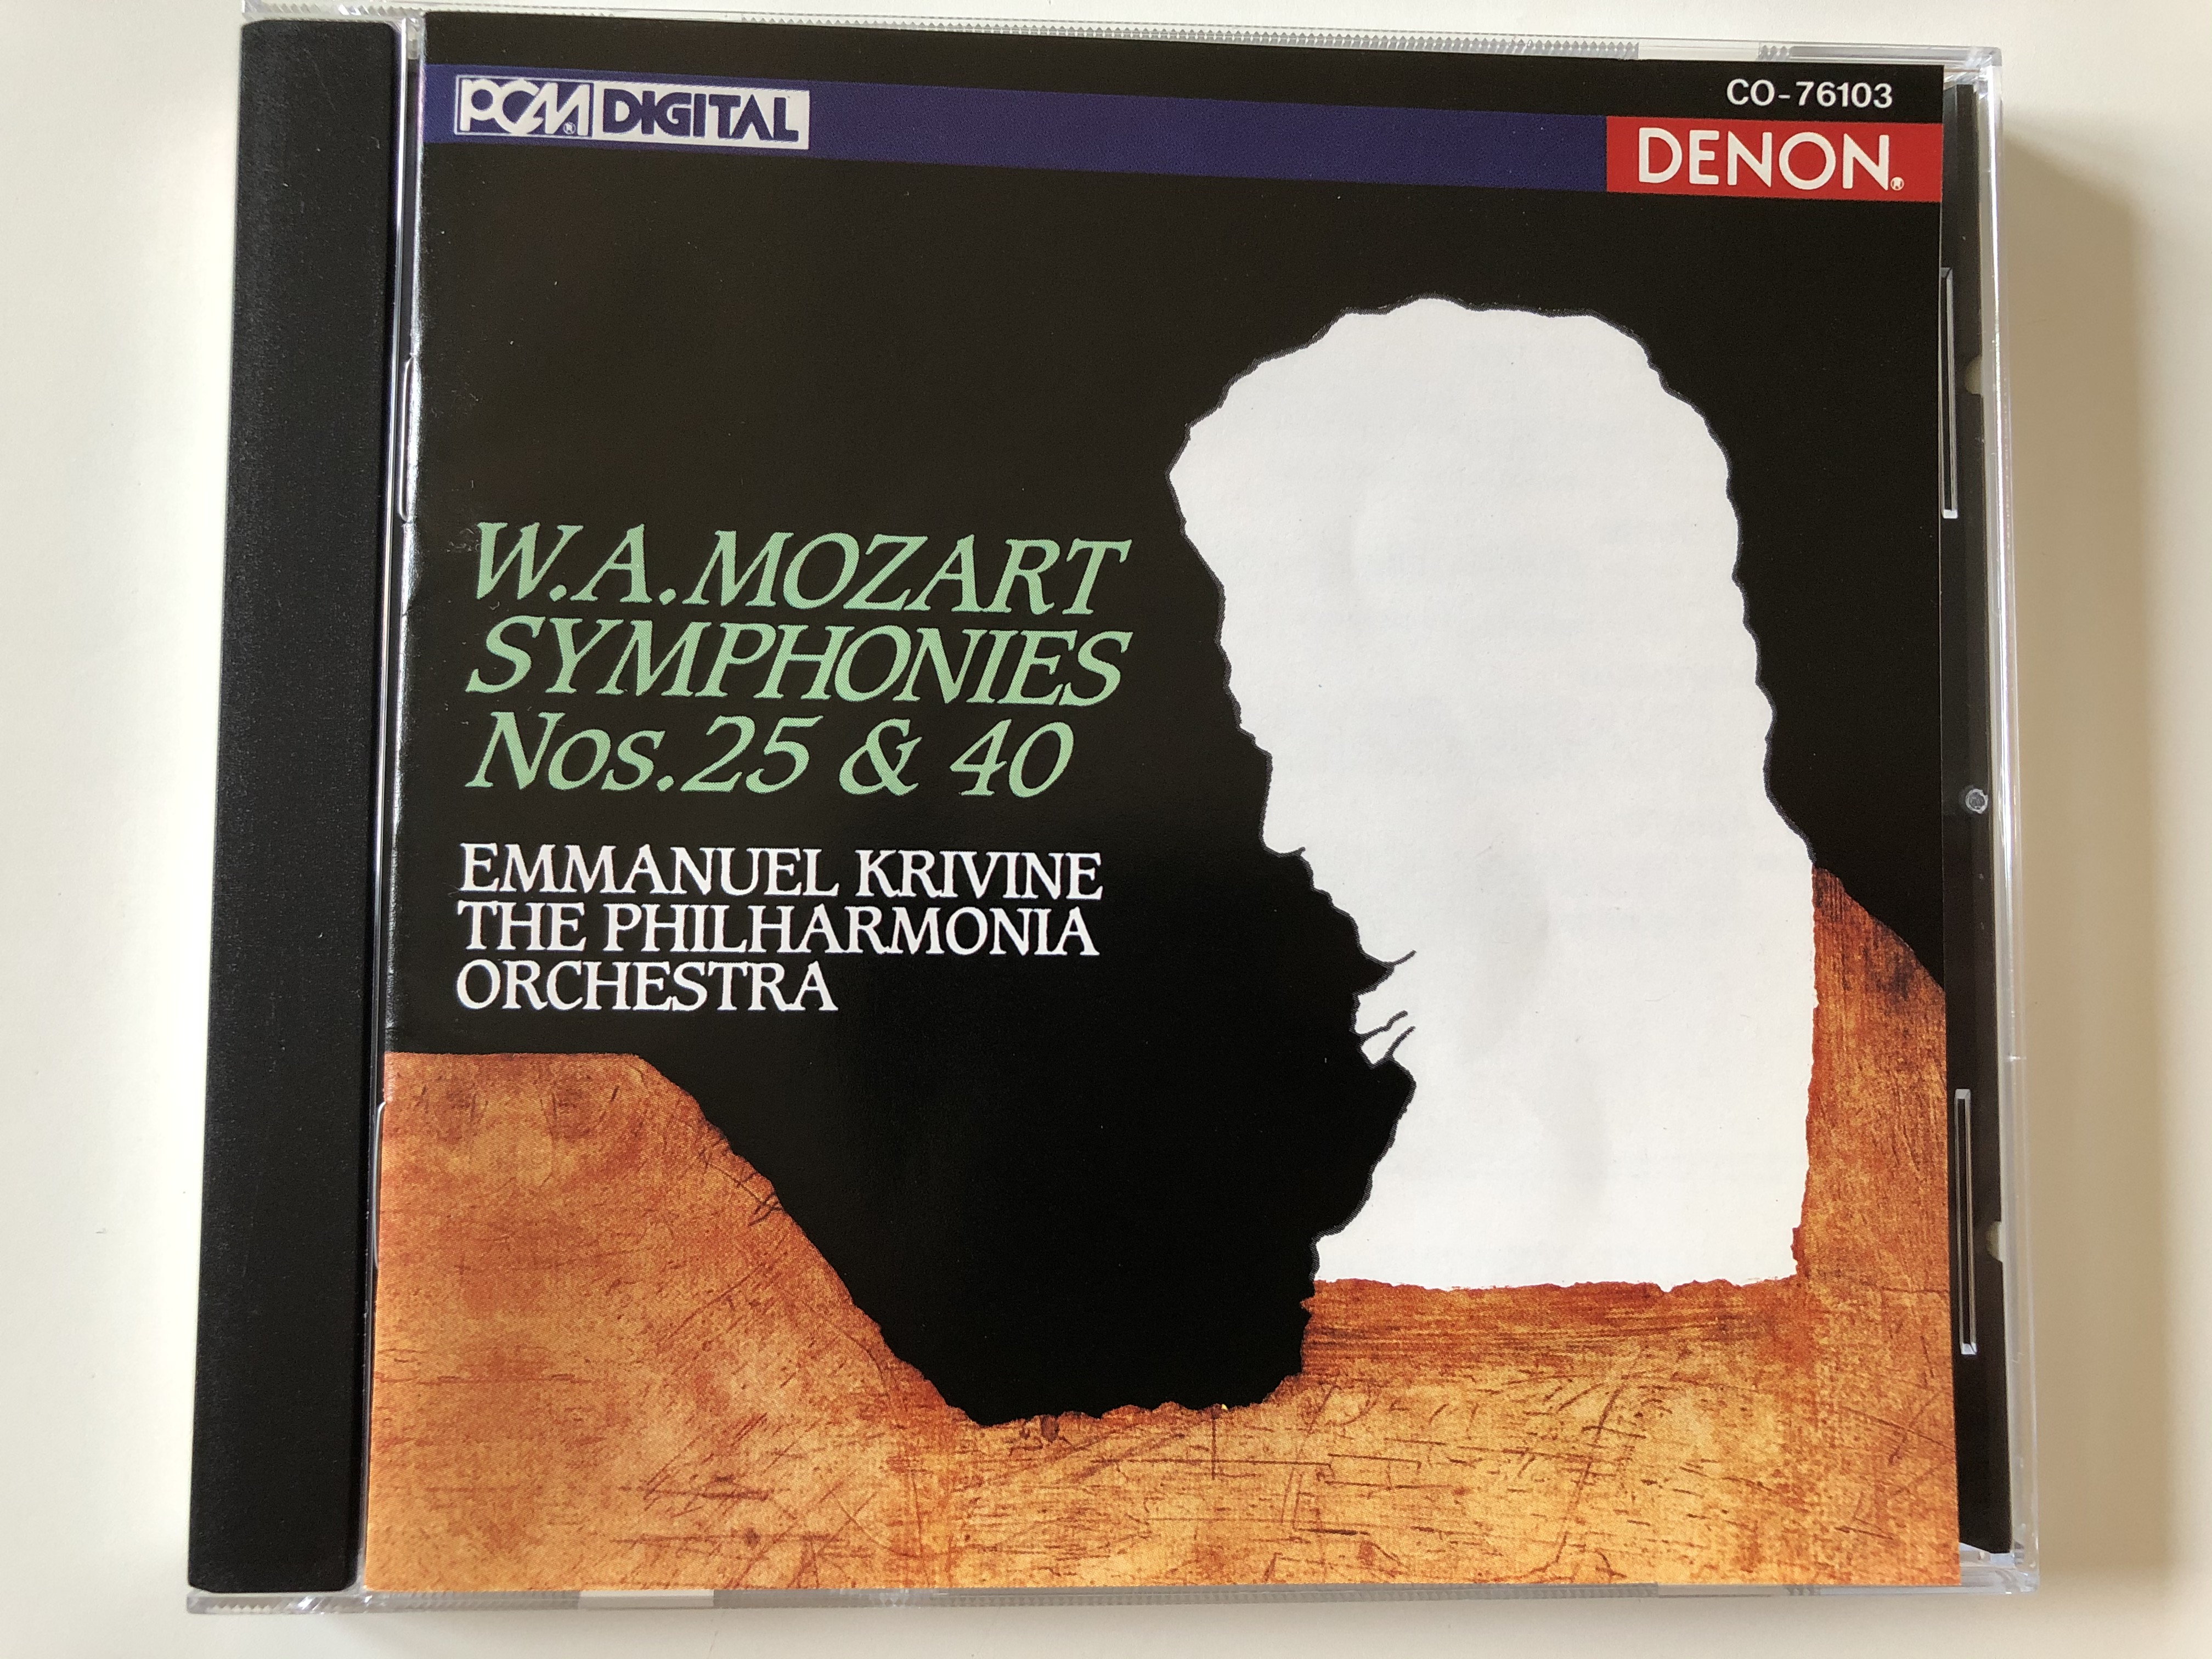 w.-a.-mozart-symphonies-nos.-25-40-emmanuel-krivine-the-philharmonia-orchestra-nippon-columbia-co.-audio-cd-1990-stereo-co-76103-1-.jpg